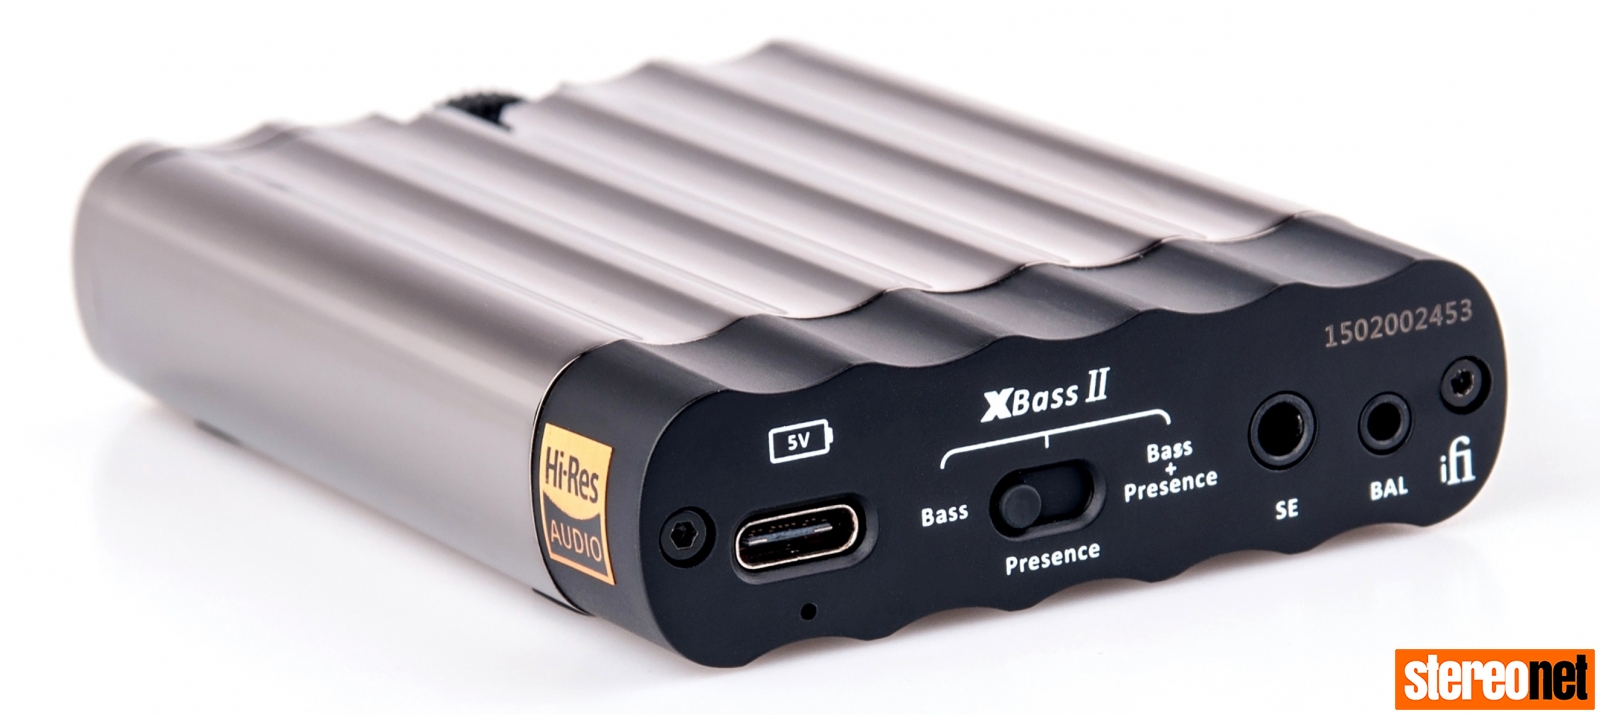 iFi xCAN rear ports with USB-C